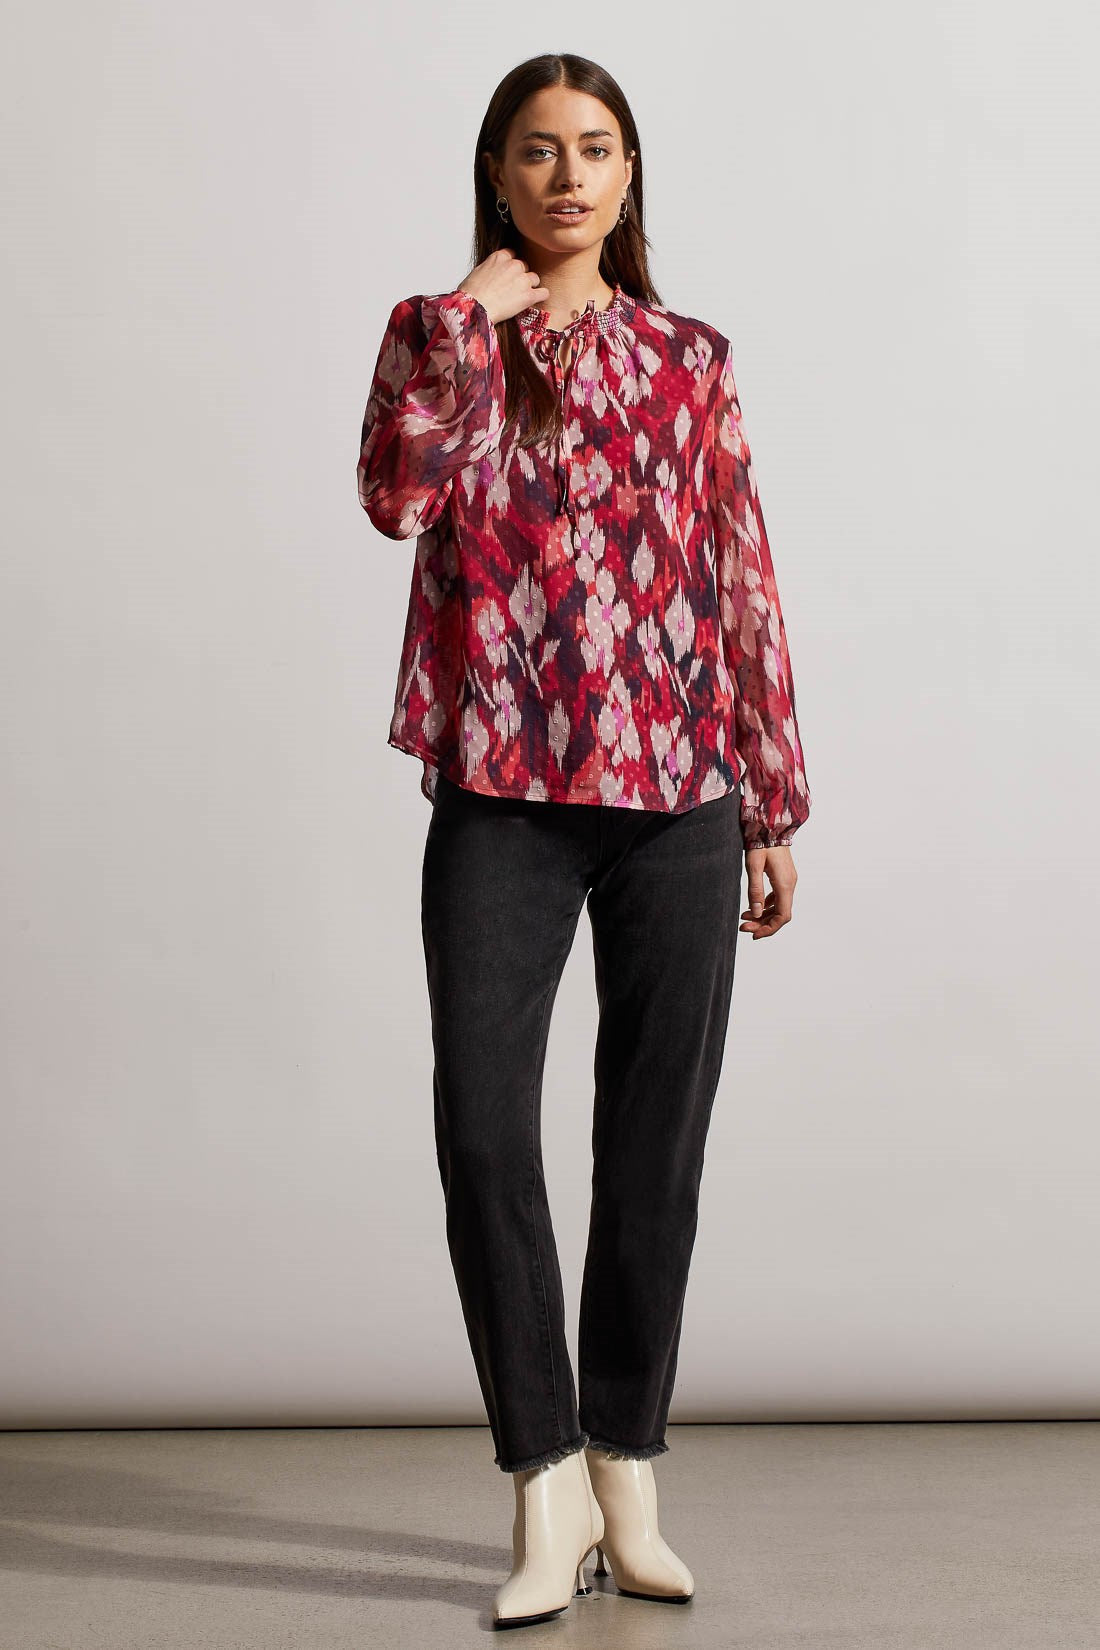 Puffy Sleeve Blouse - FINAL SALE